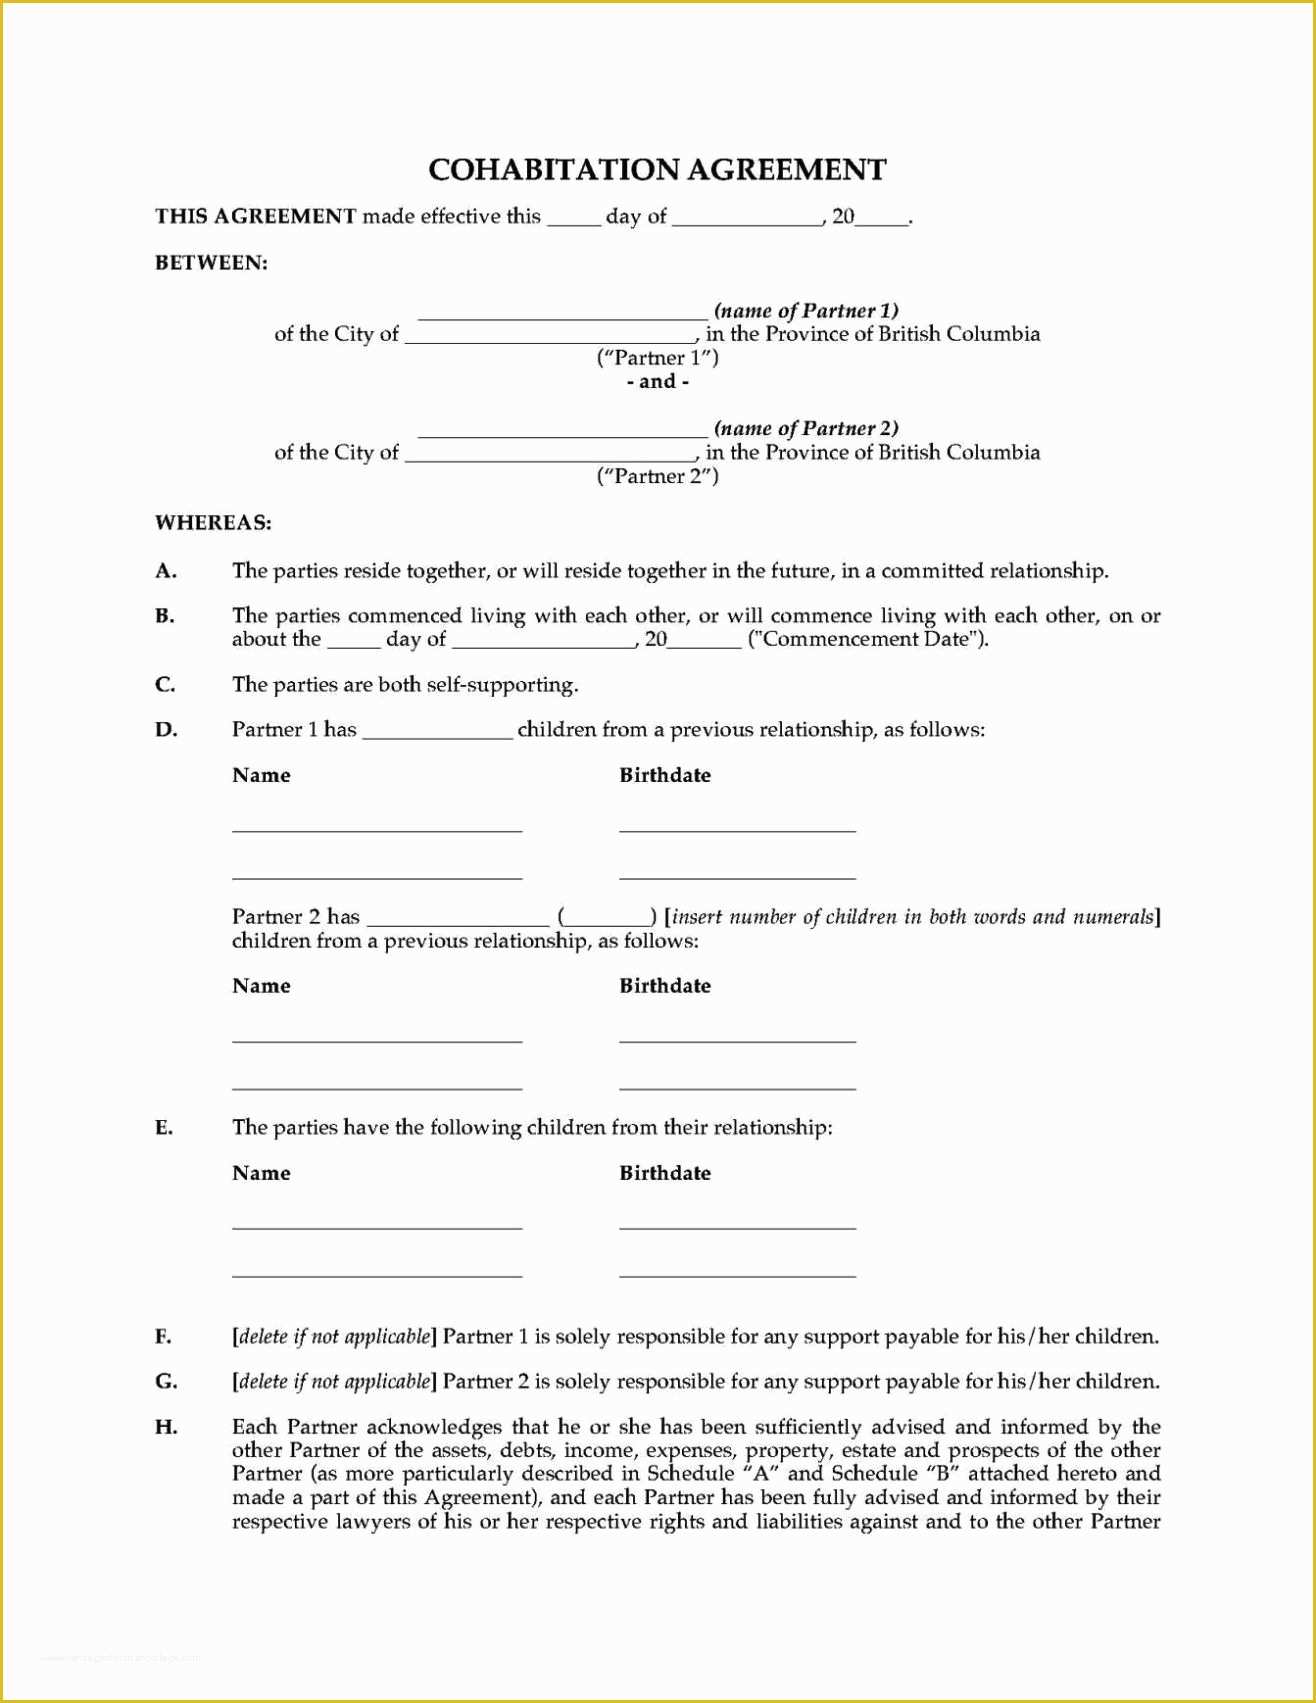 Living together Agreement Template Free Of Free Cohabitation Agreement Template Sampletemplatess